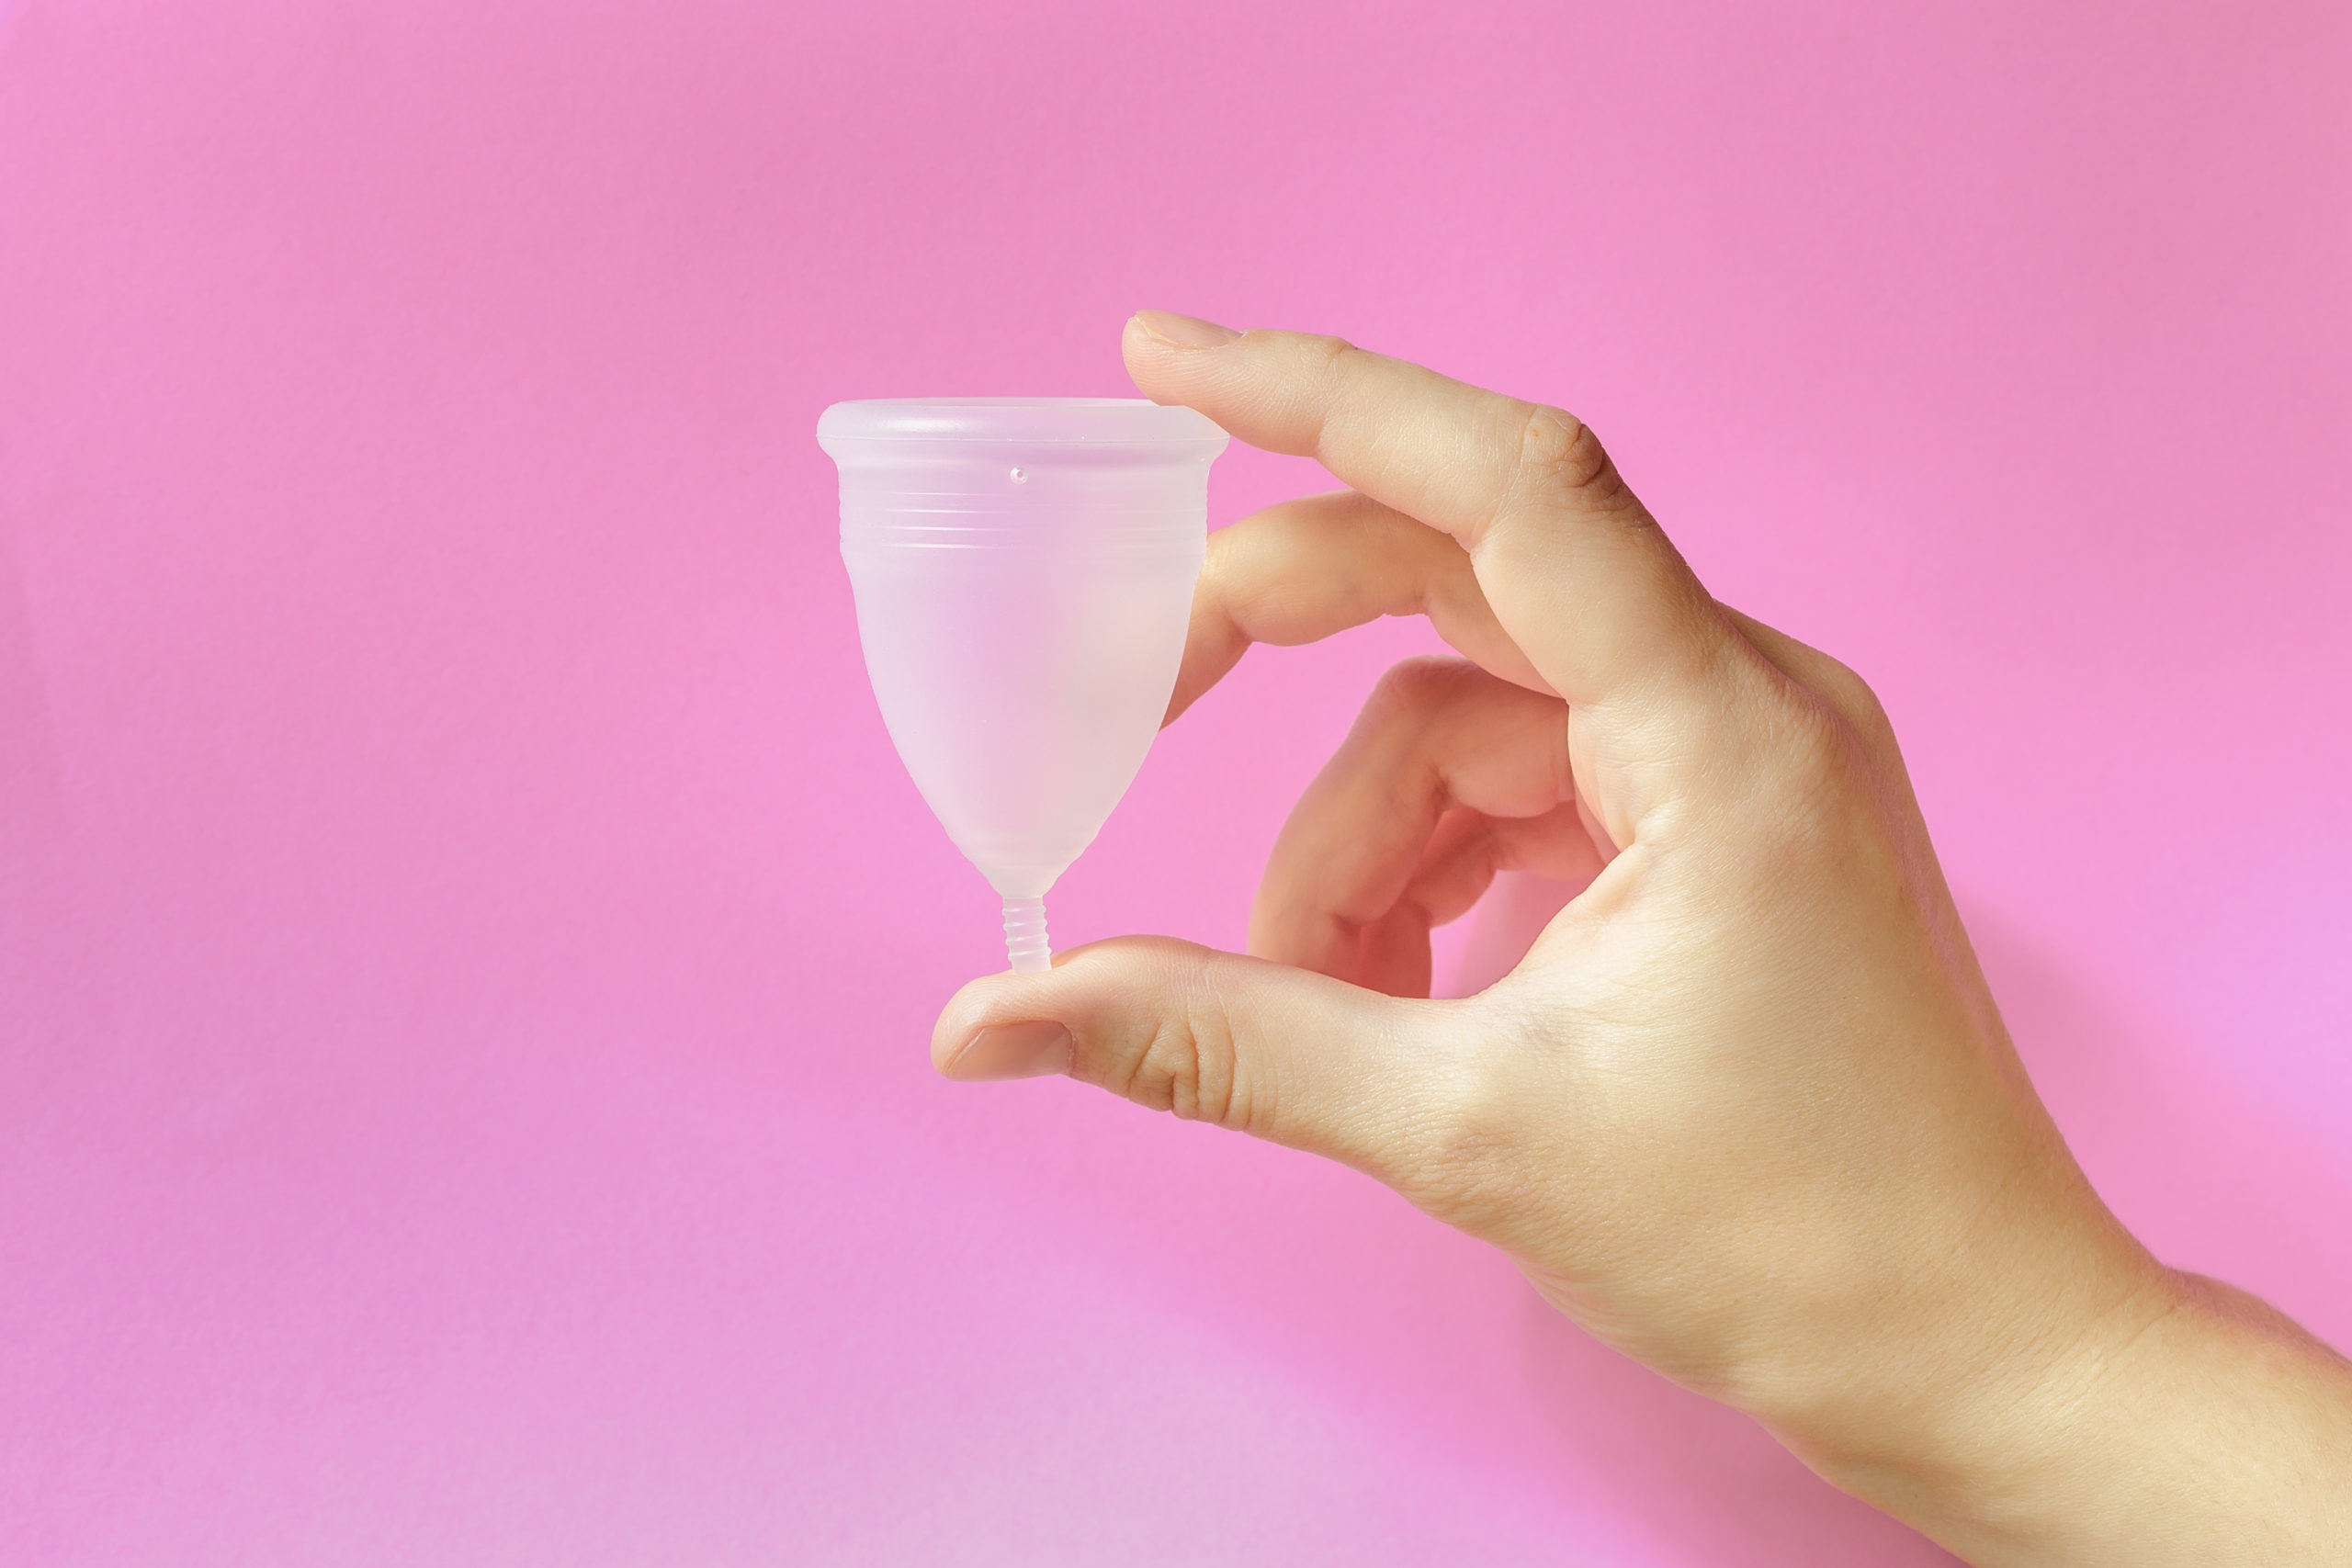 MENSTRUAL CUPS AND HOW TO FIND THE RIGHT ONE